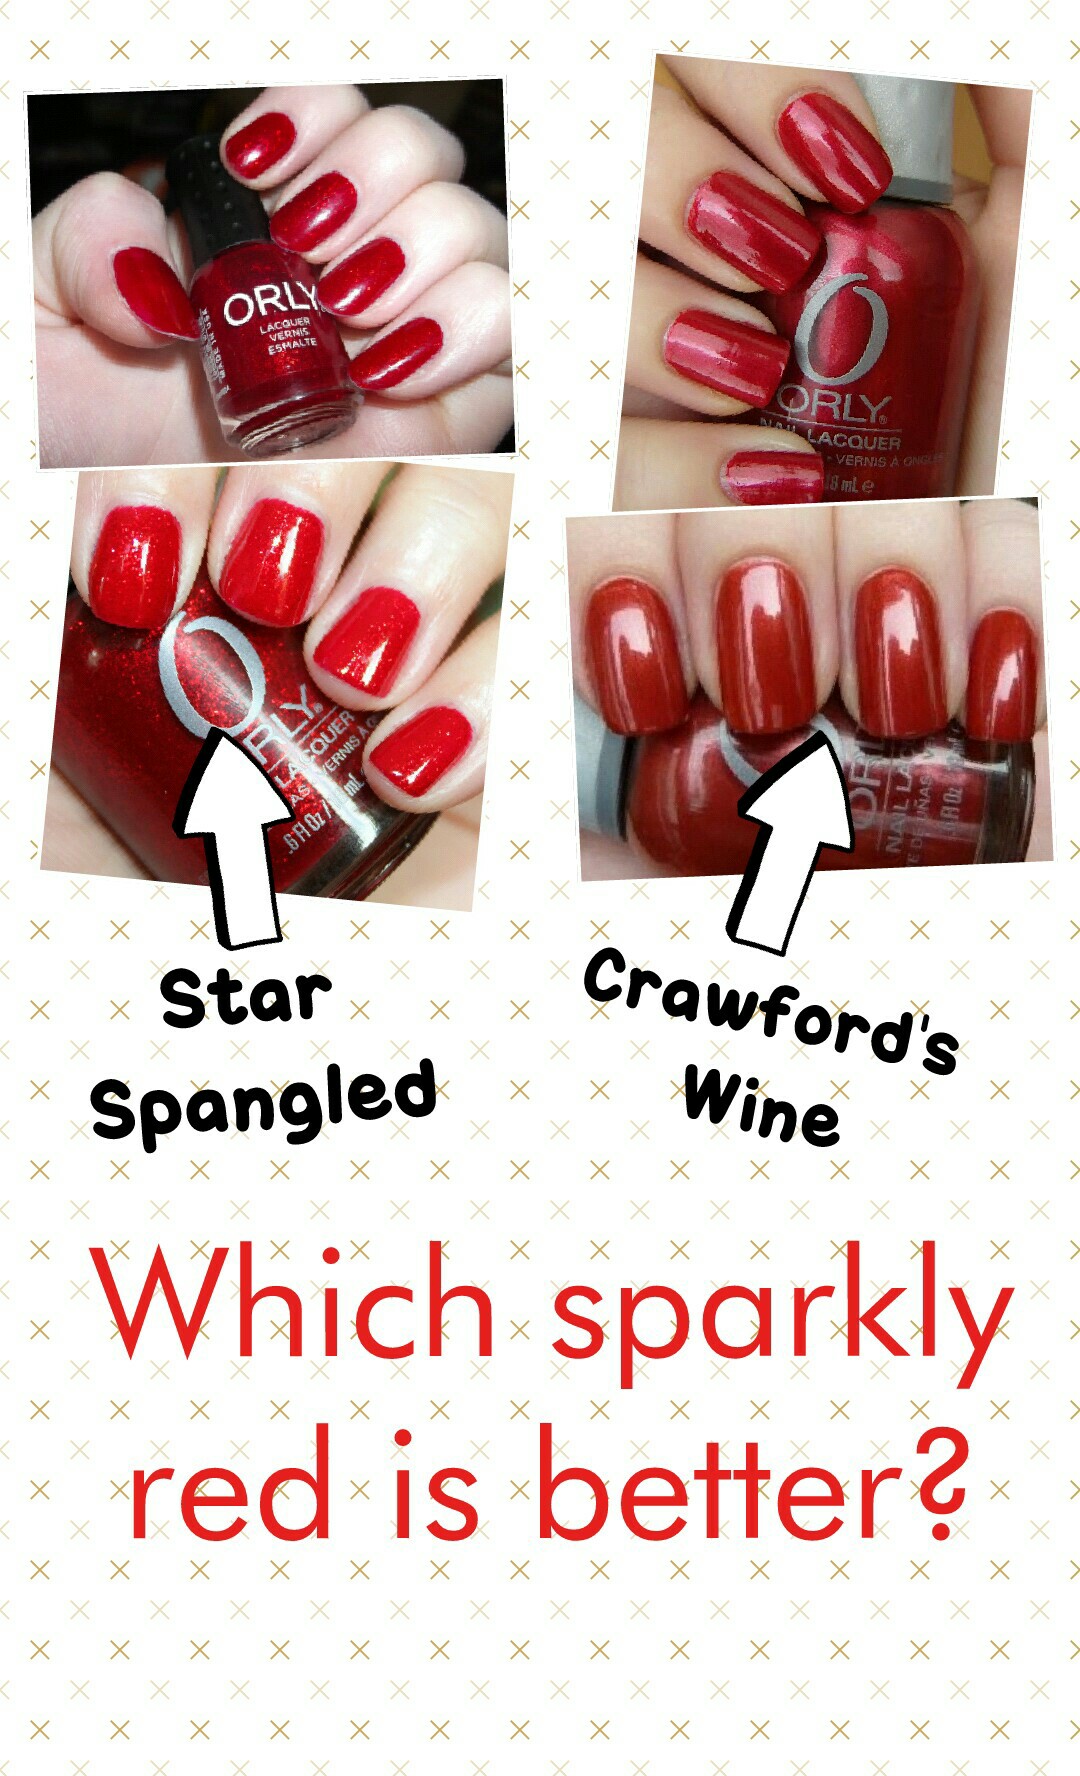 Which sparkly red nail polish is better? 